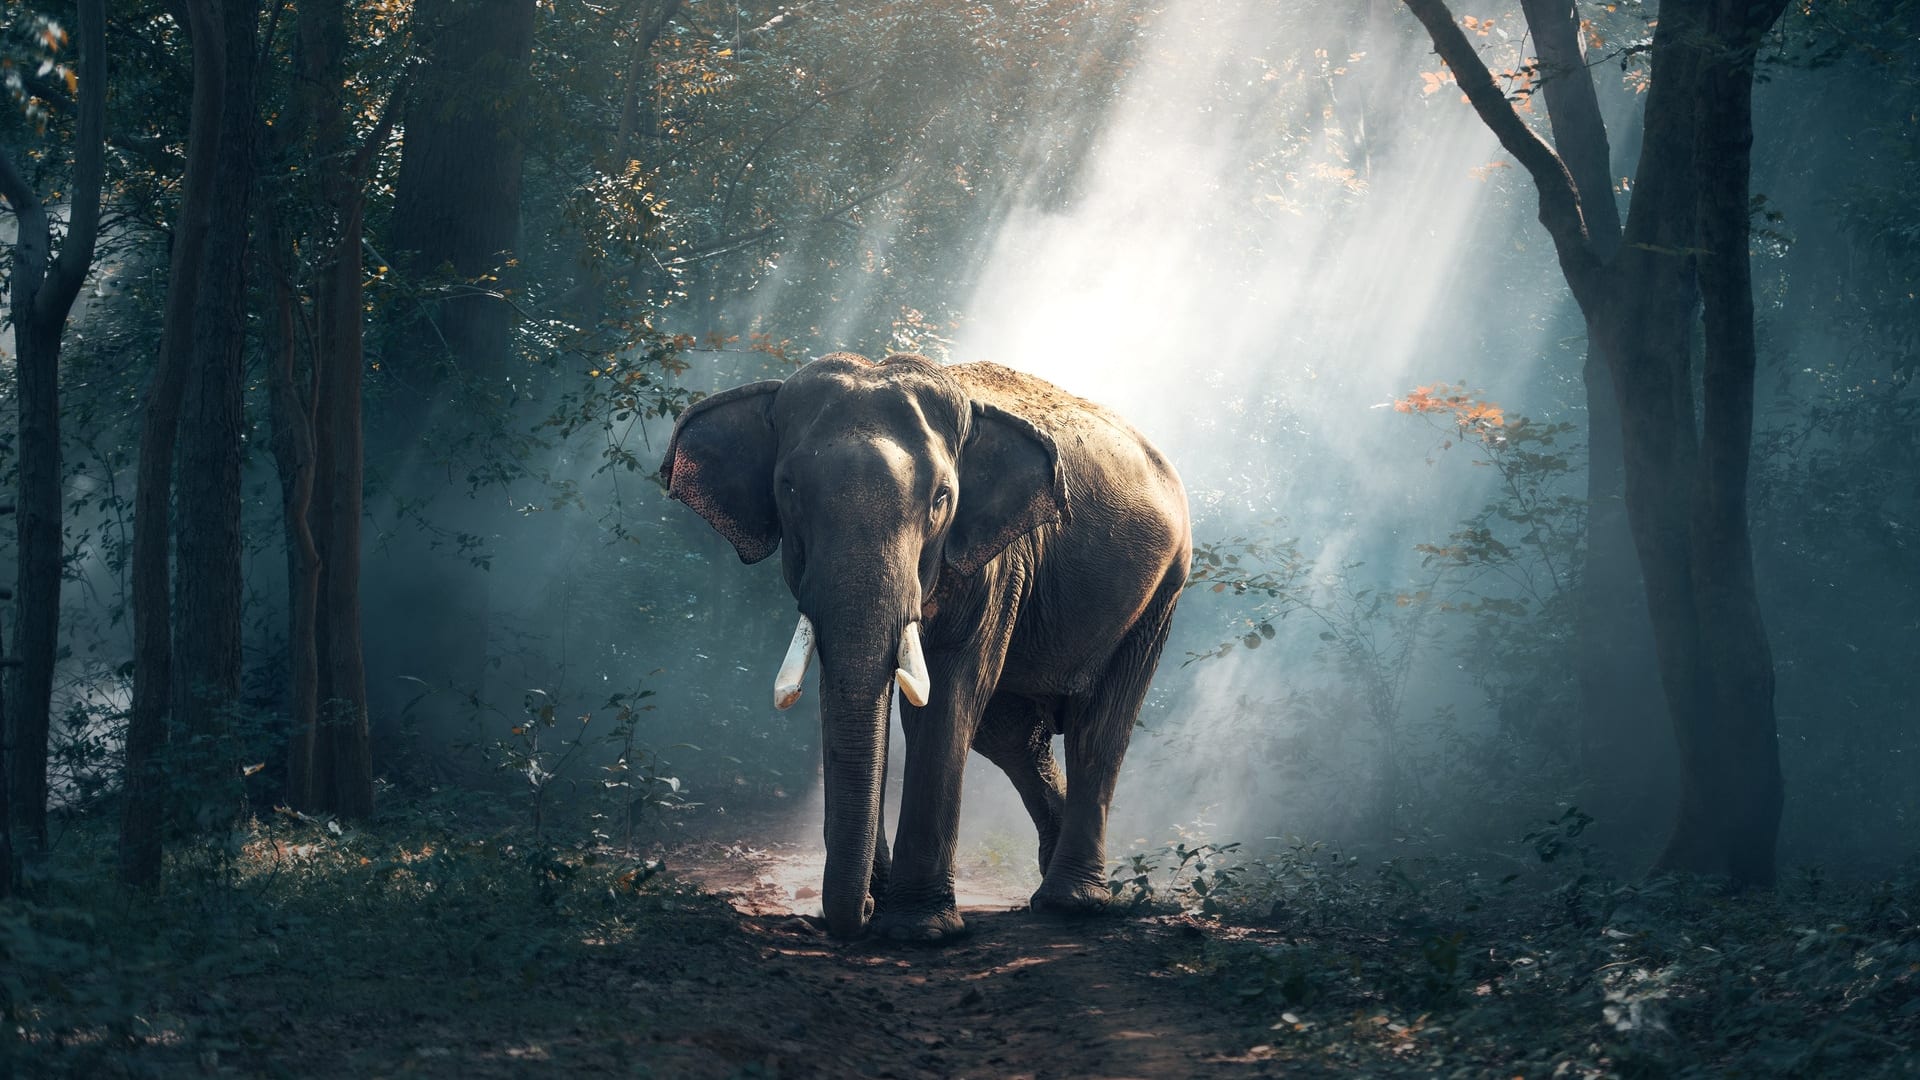 Elephant walking in the forest towards